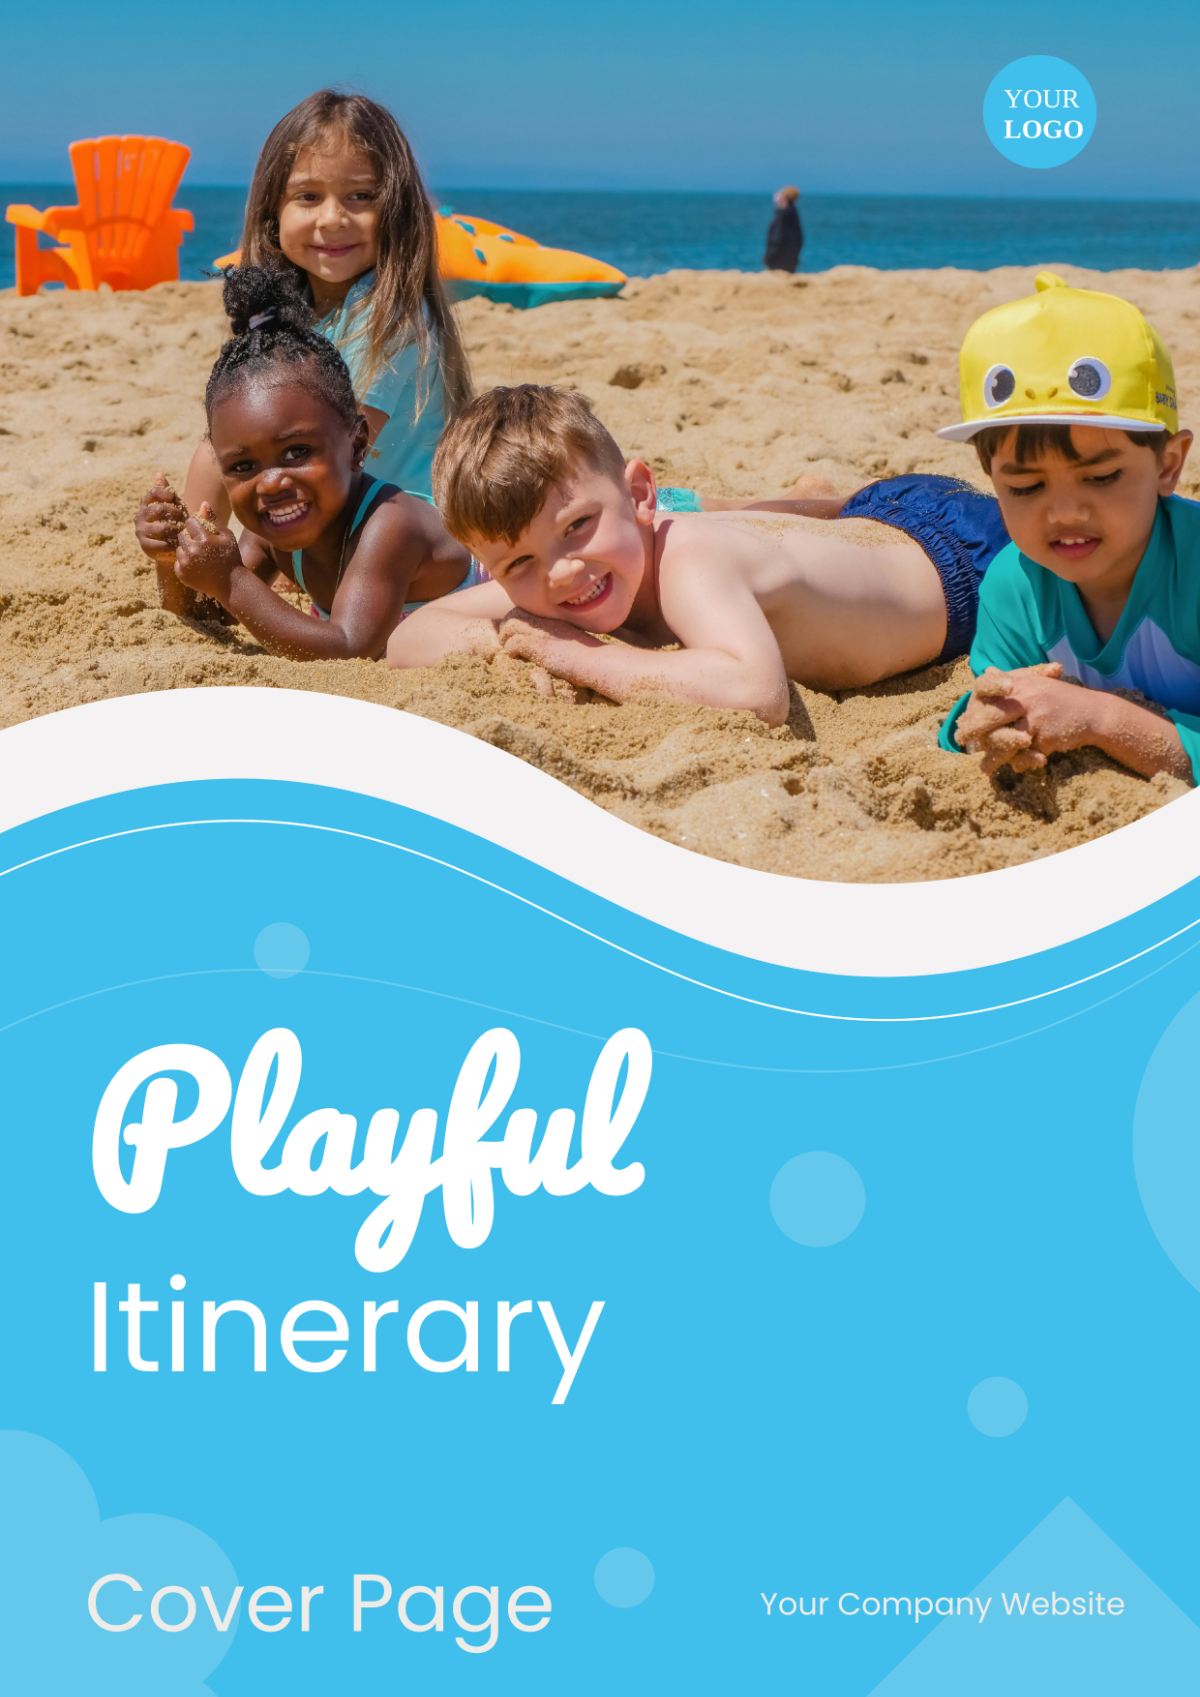 Free Playful Itinerary Cover Page Template